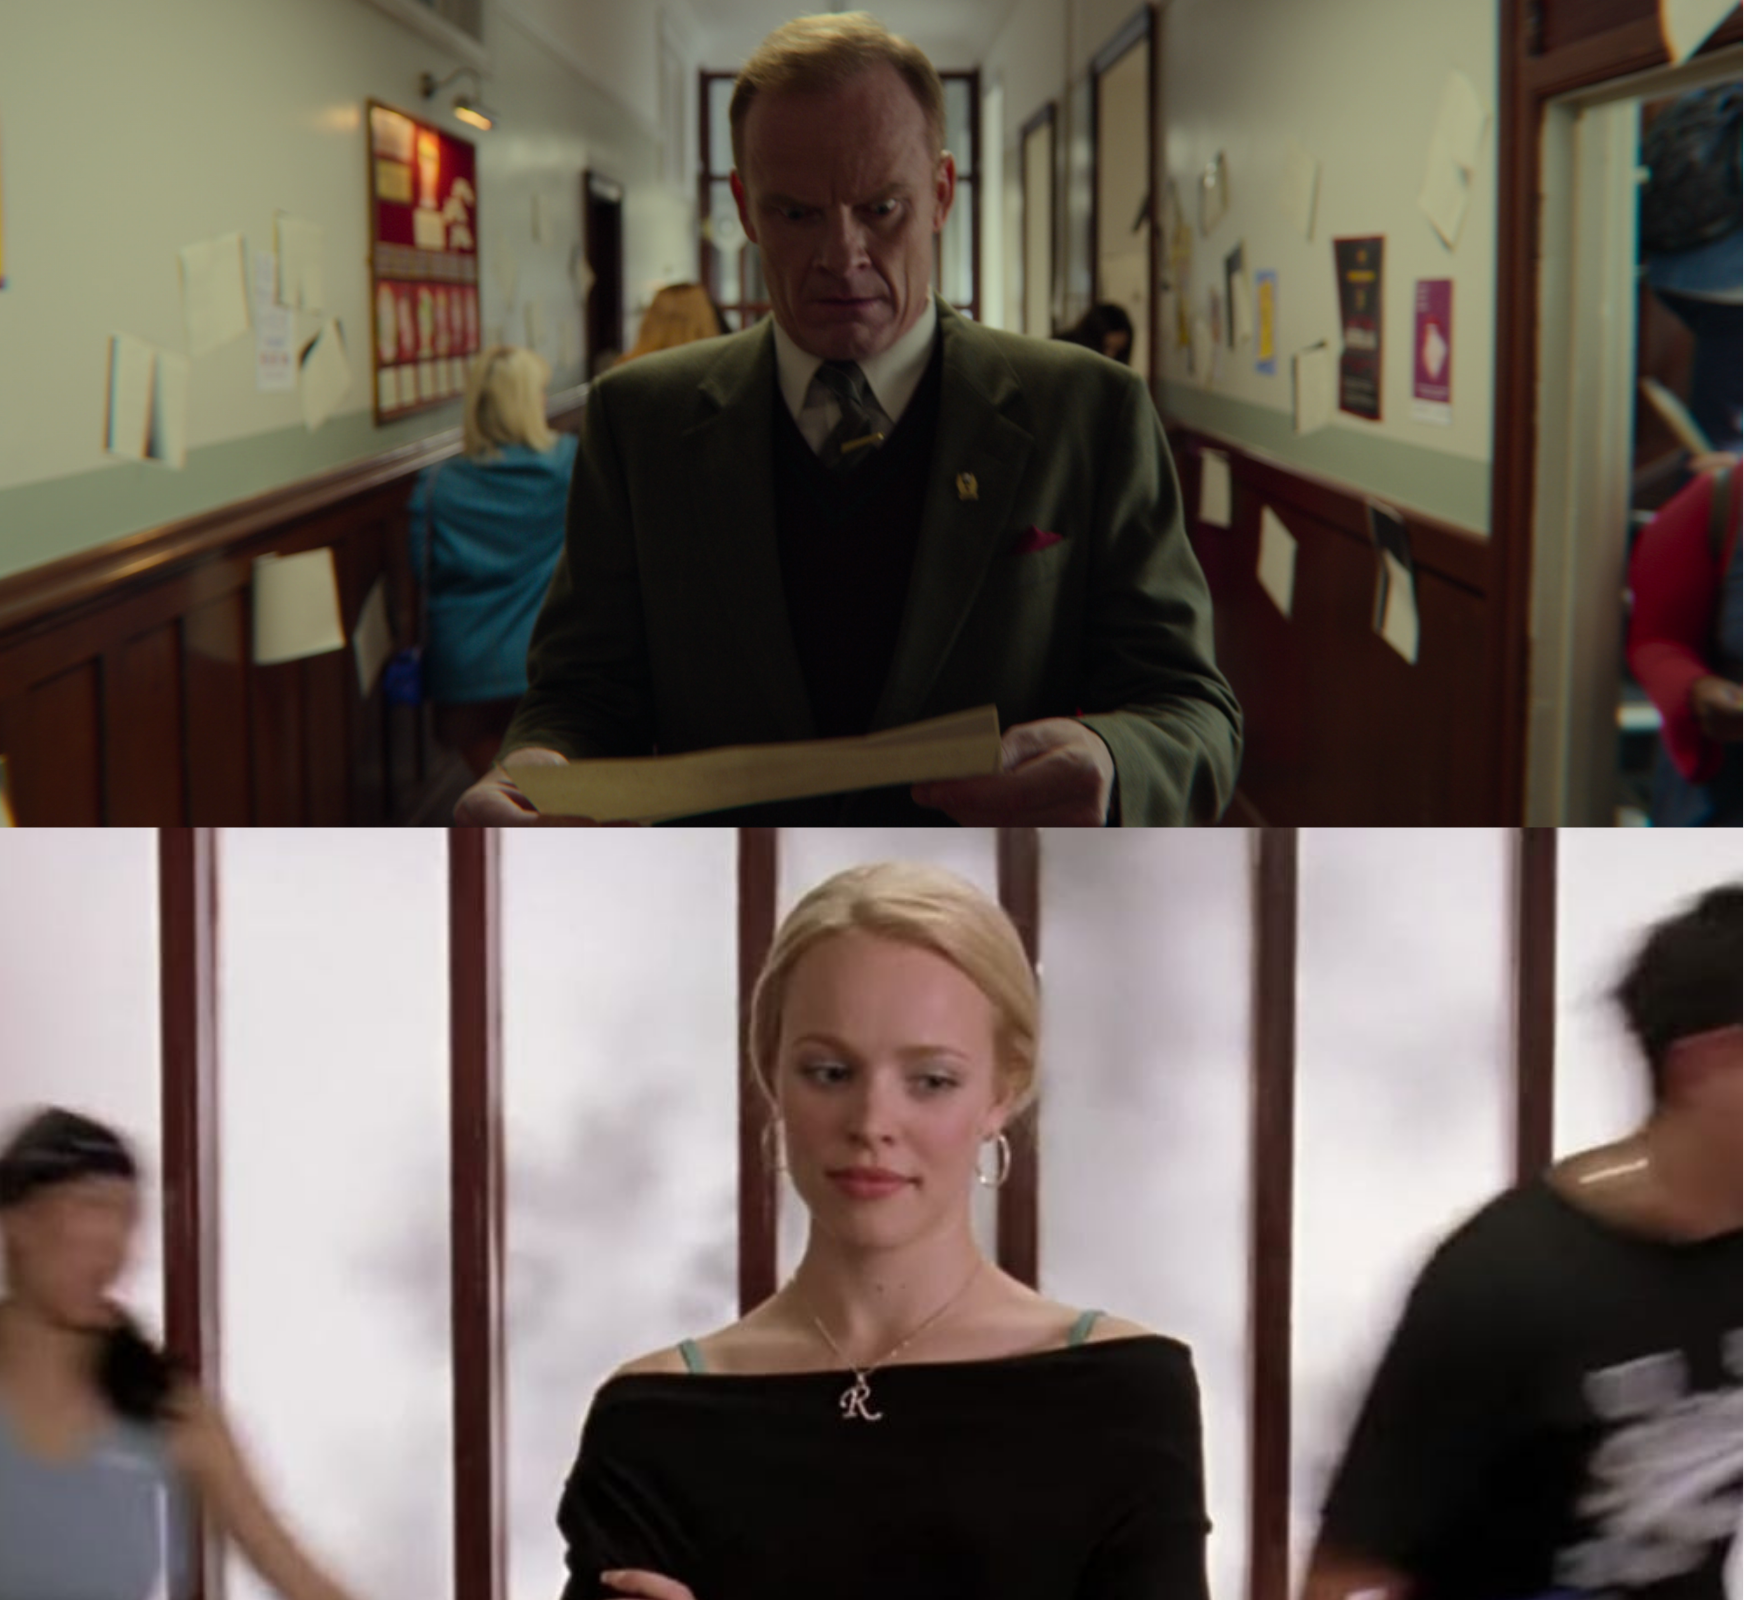 Top Panel: Principal Groff from Sex Education holding a piece of paper and looking at it in the school hallway with students around him. Bottom Panel: Regina George from Mean Girls standing in the school hallway with students running around her.